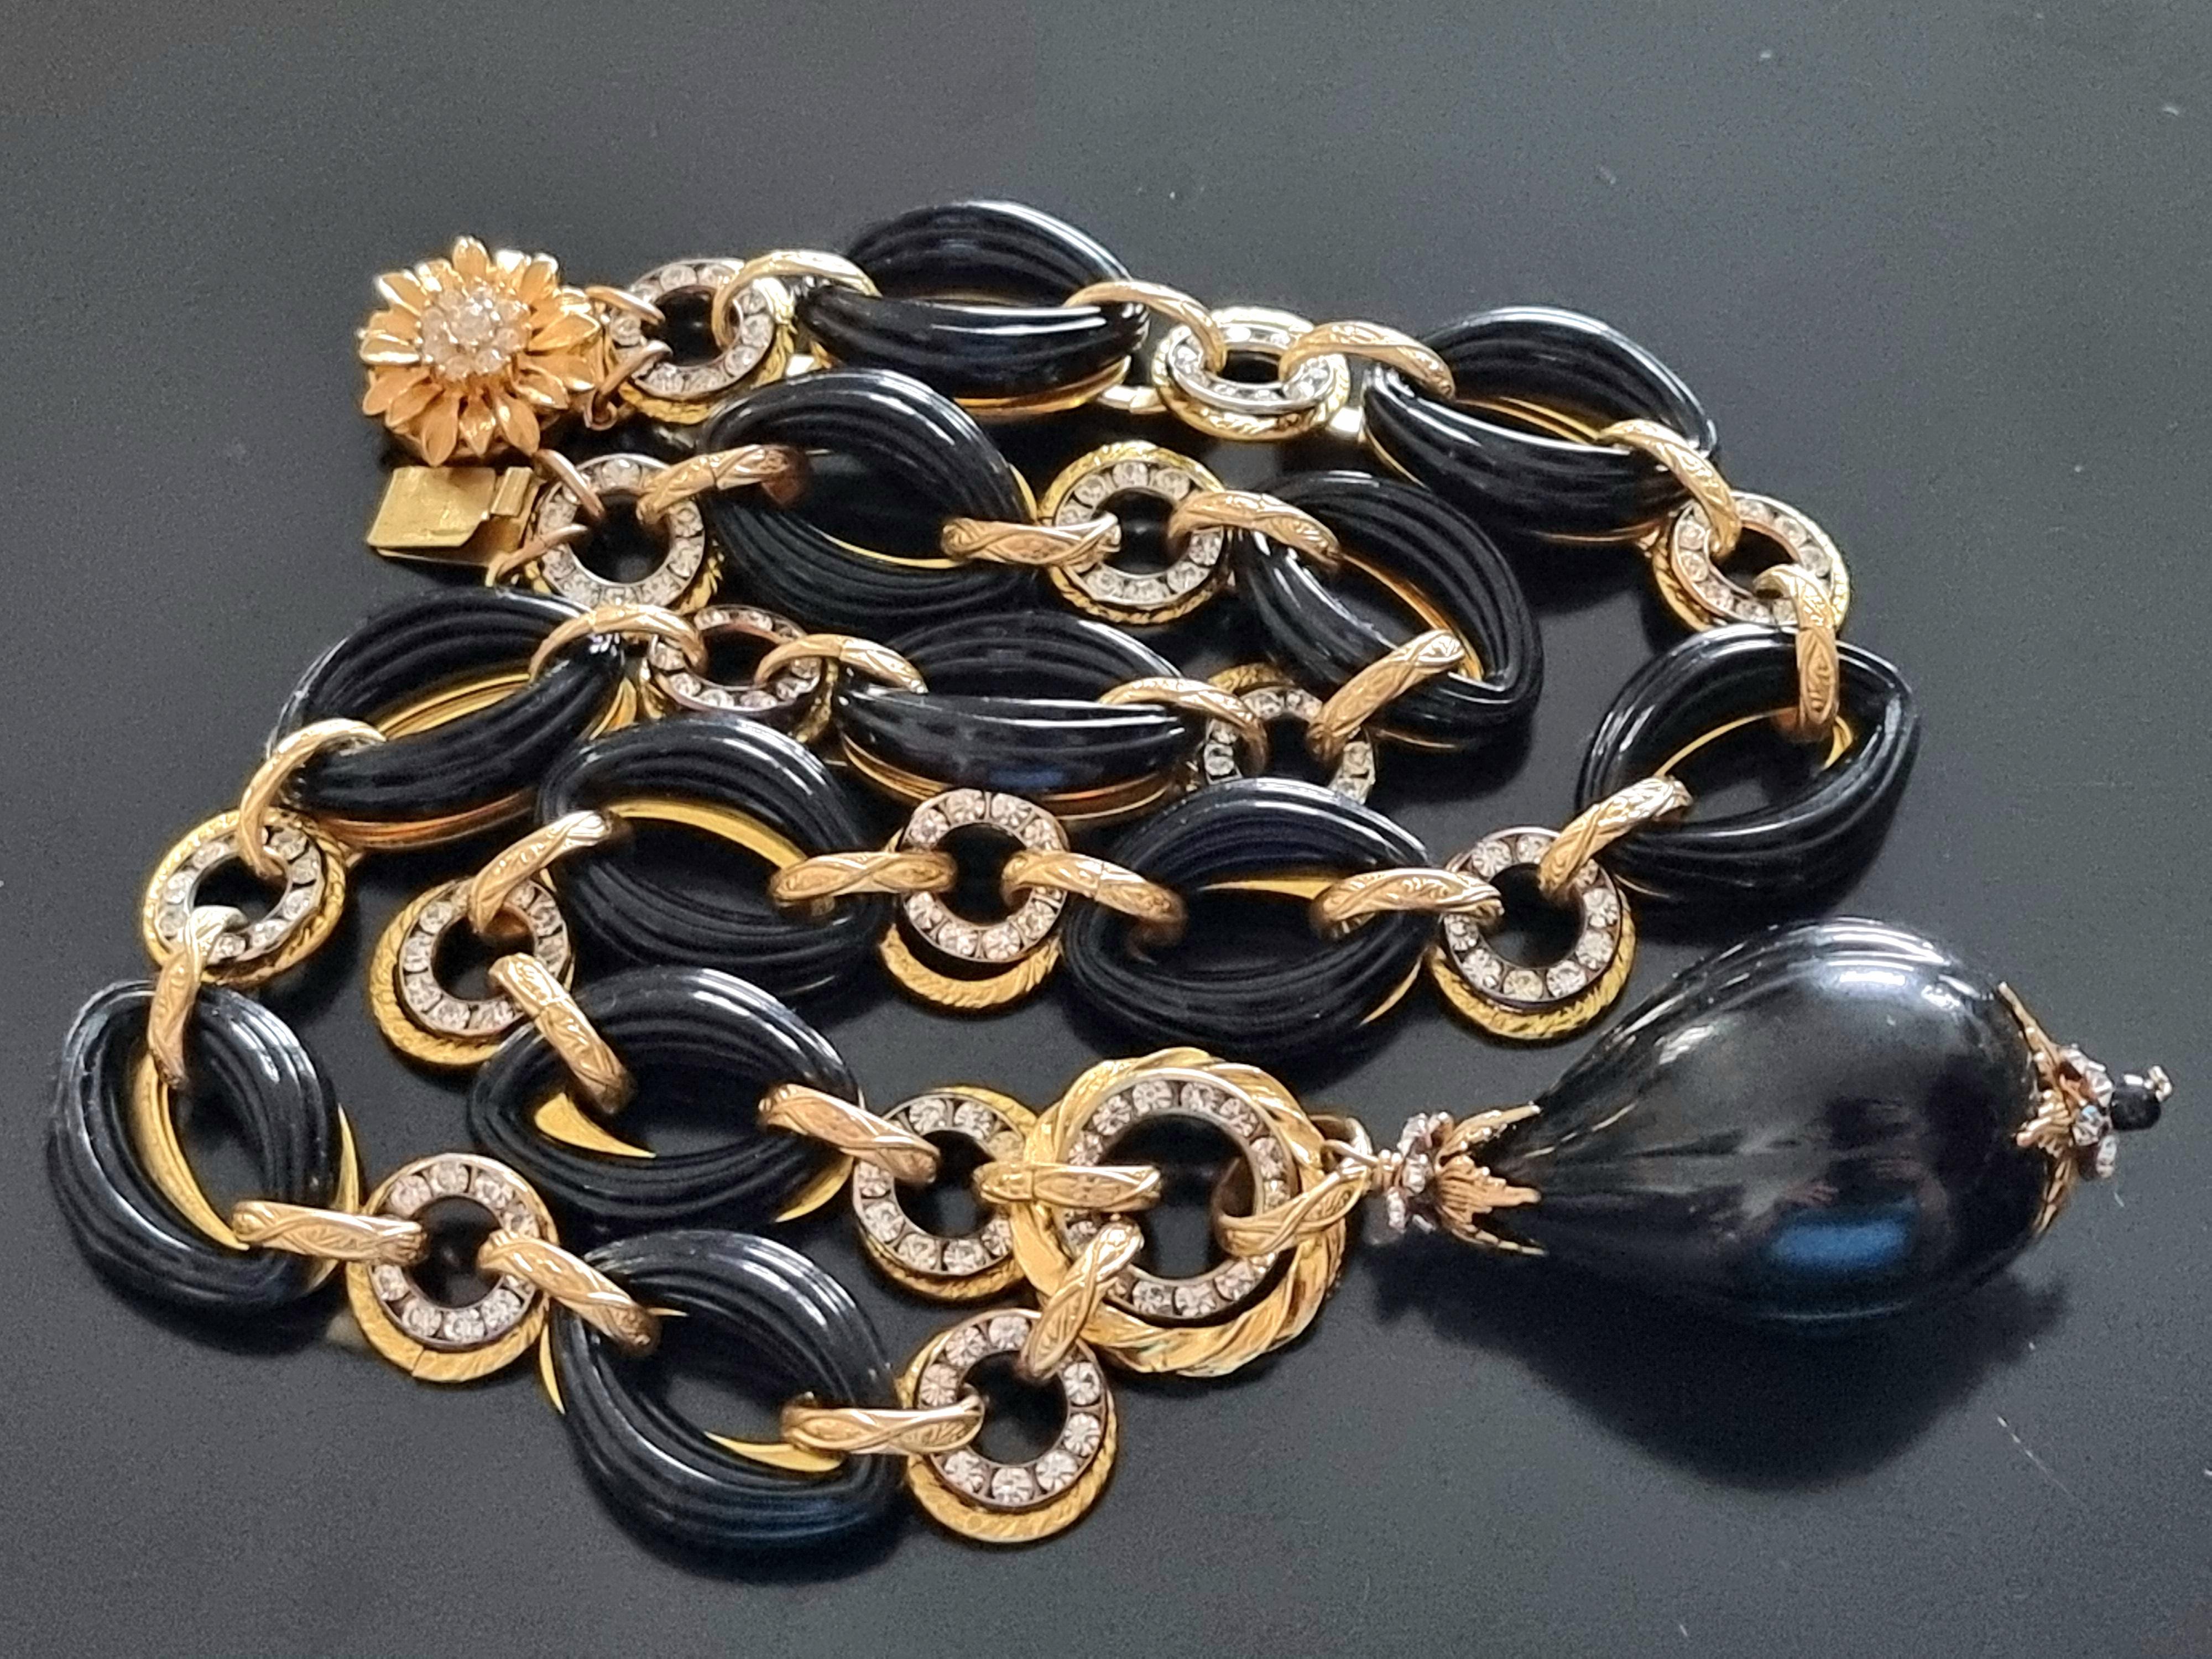 CHANEL, Magnificent vintage NECKLACE, High Fashion, France 2